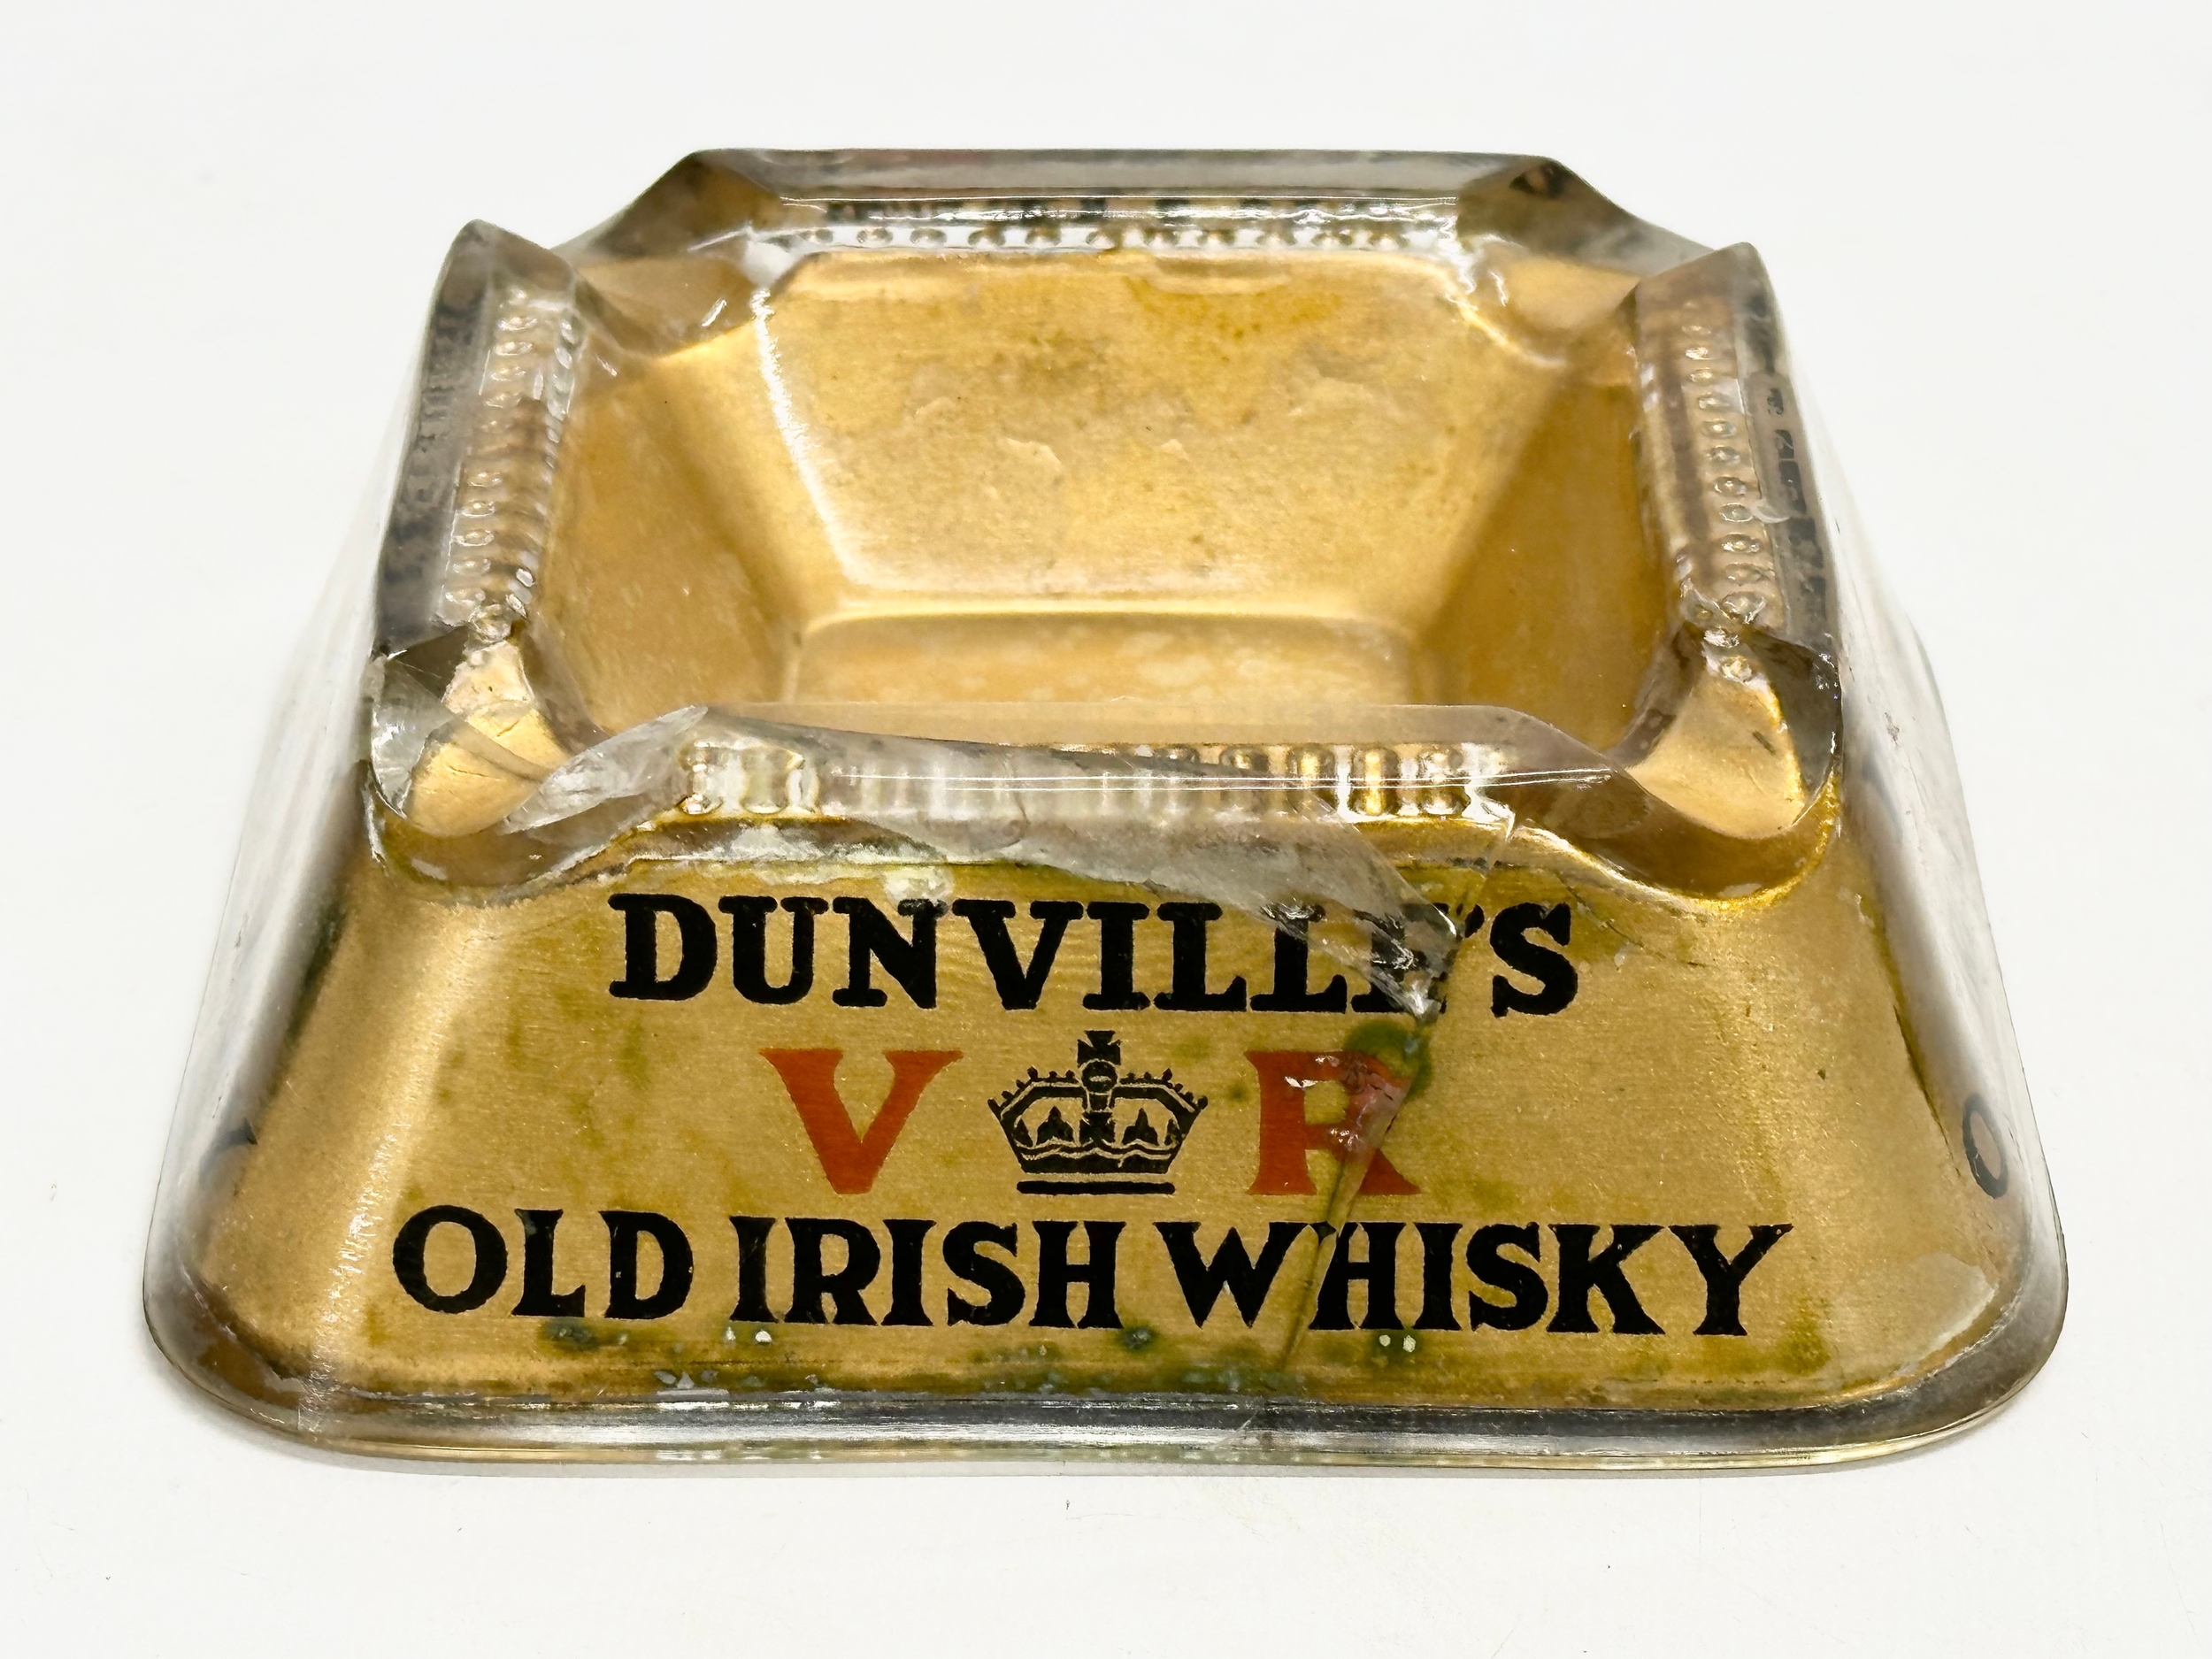 A rare Dunville’s Old Irish Whisky glass ashtray. 11.5x11.5x4cm - Image 3 of 6